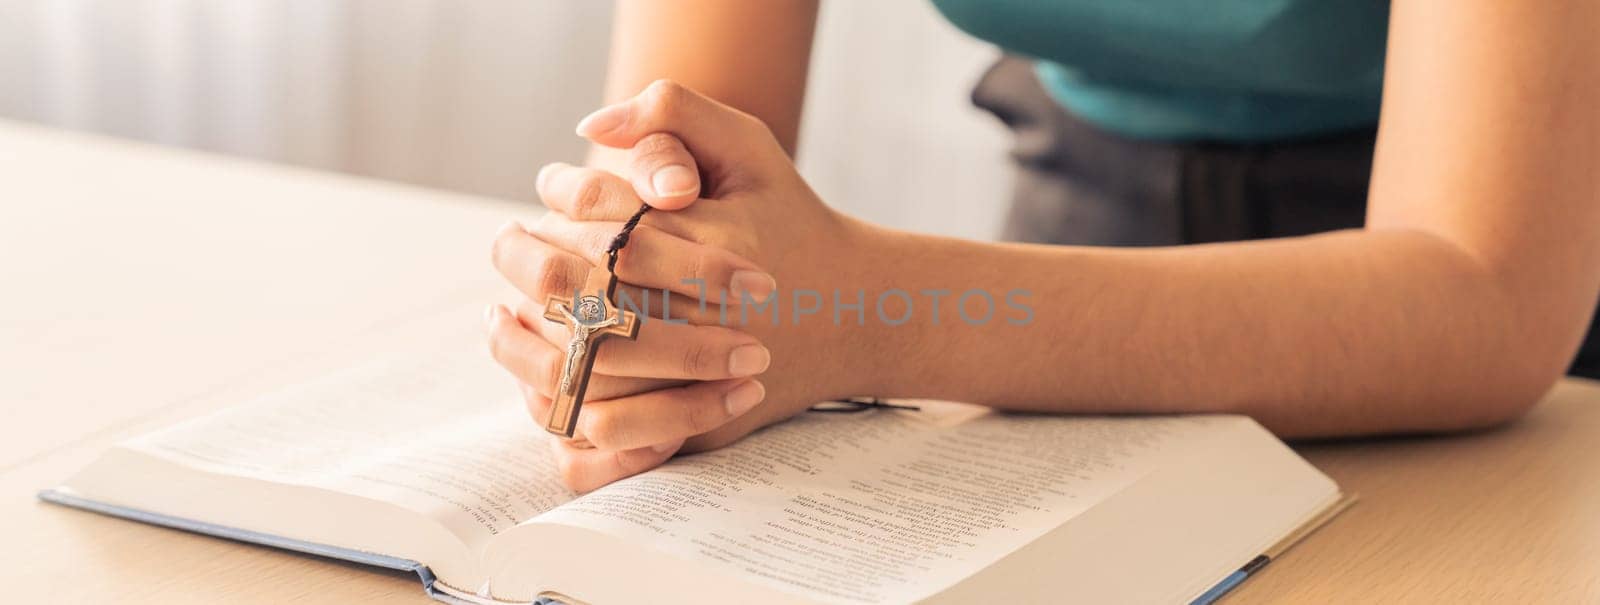 Cropped image of female reading a bible book while holding cross. Burgeoning. by biancoblue